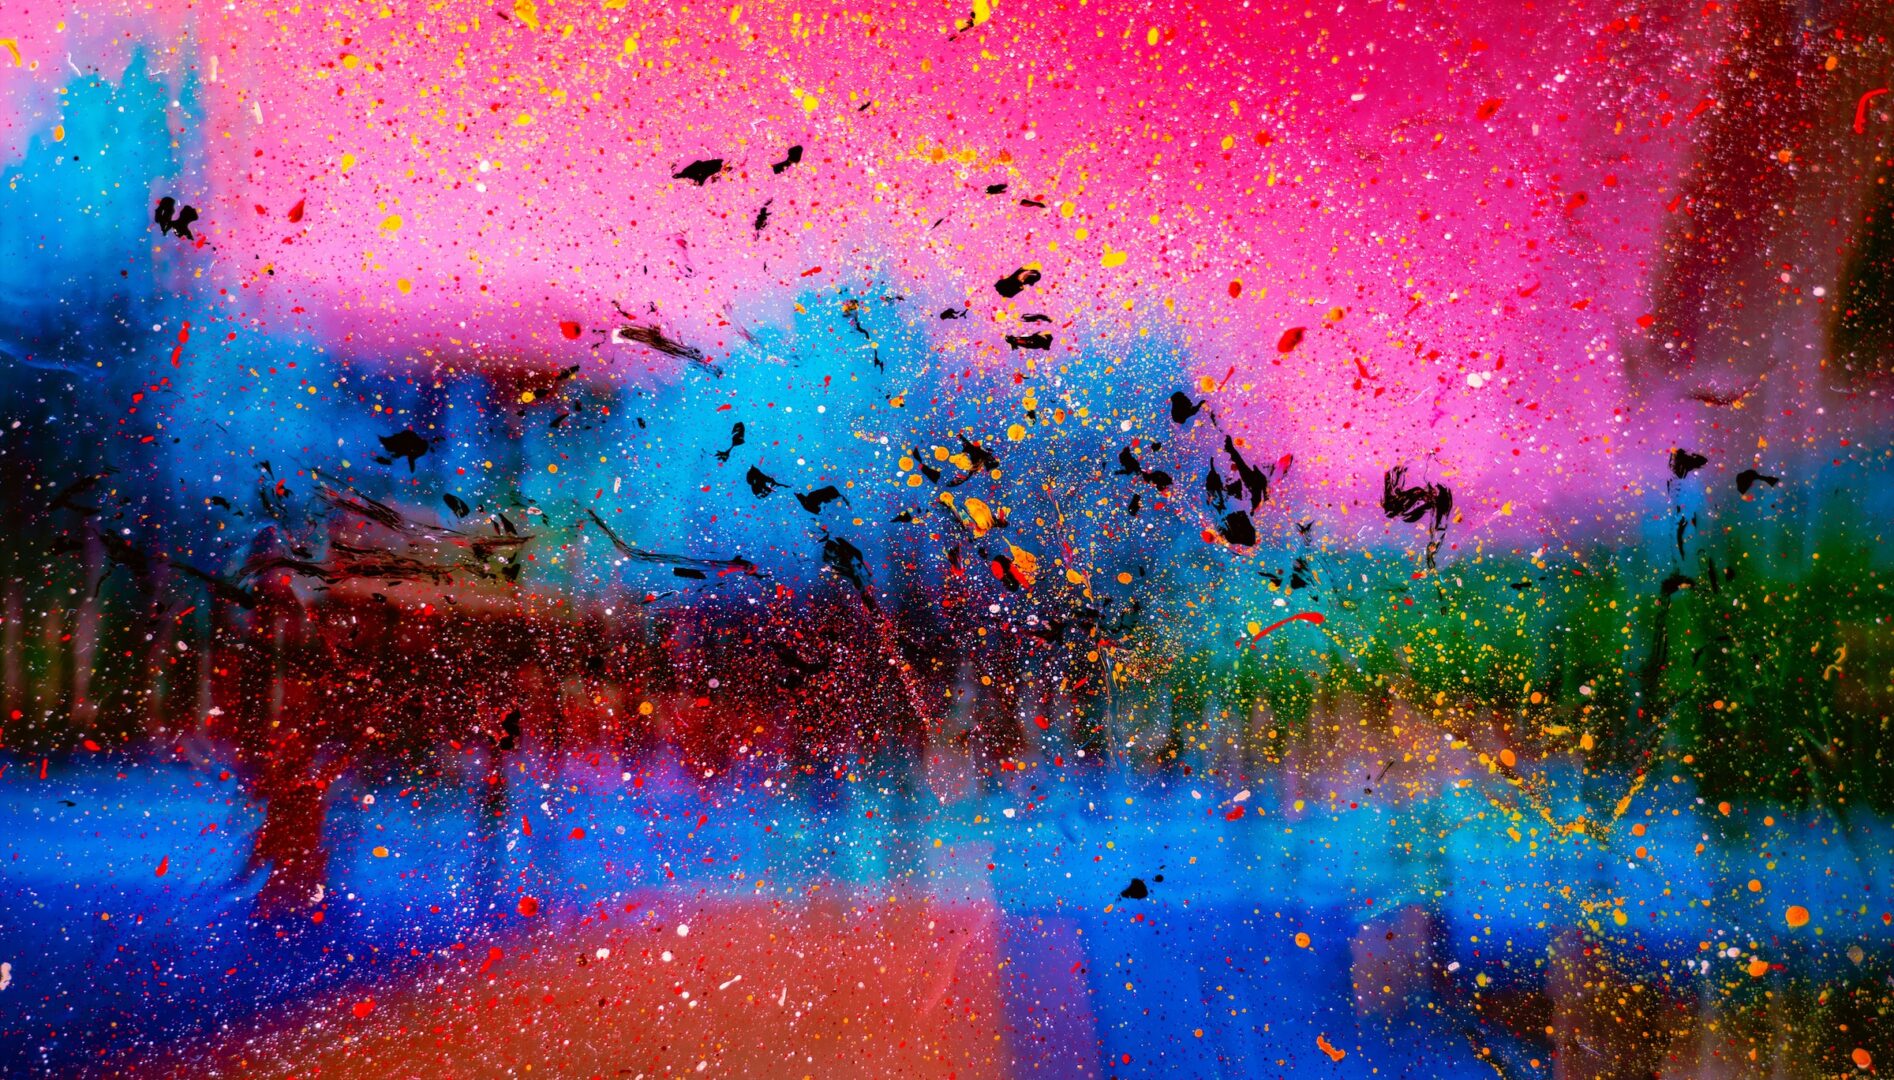 Abstract image with neon pink and blue background and paint splatters in the foreground